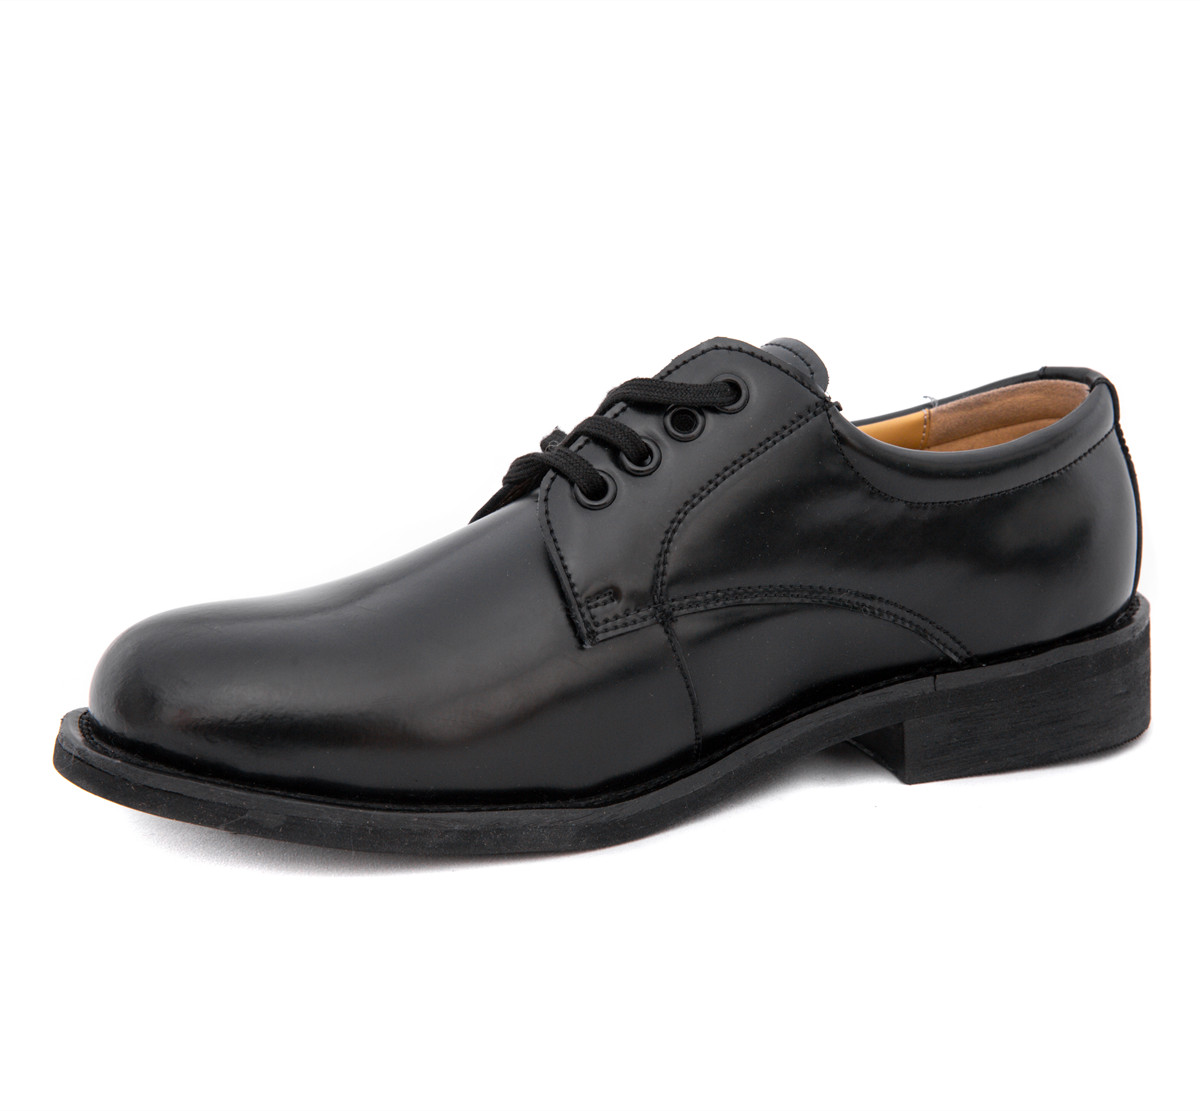 Durable Military Officer Black Leather Shoes for Formal Occasions